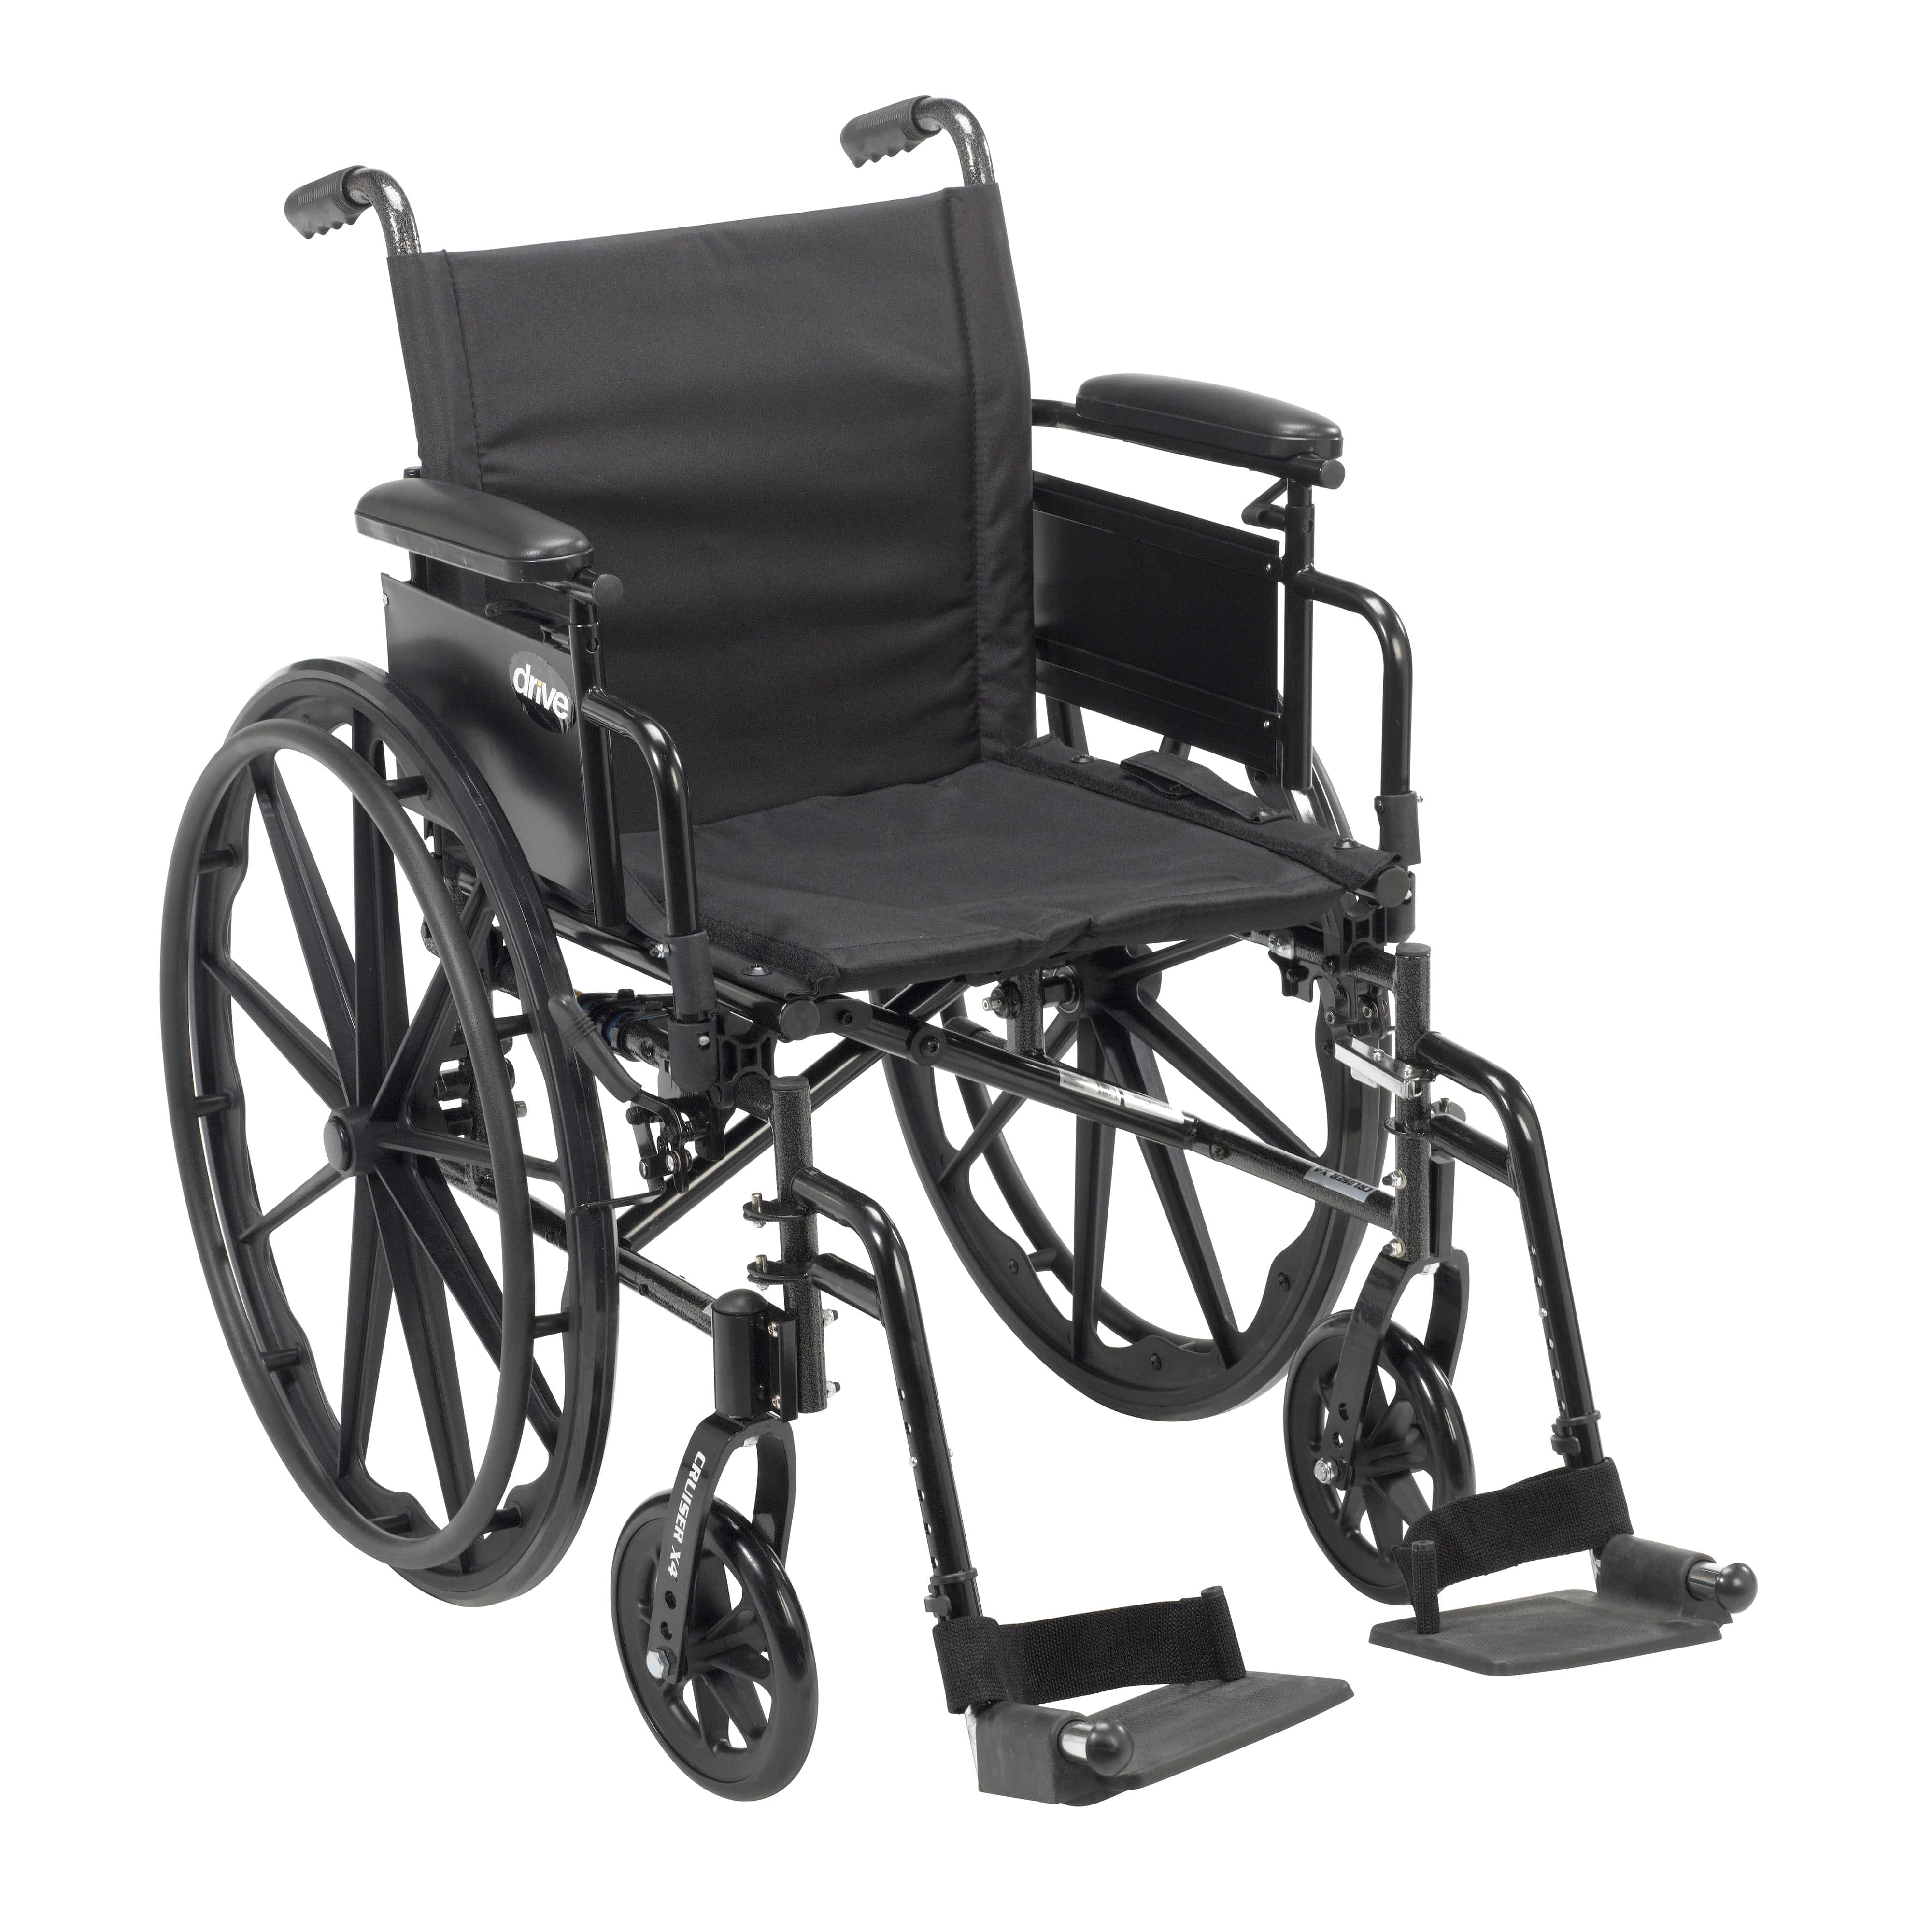 Drive Medical Wheelchairs/Lightweight Wheelchairs Desk Arms / Swing Away Footrests / 18" Seat Drive Medical Cruiser X4 Lightweight Dual Axle Wheelchair with Adjustable Detatchable Arms